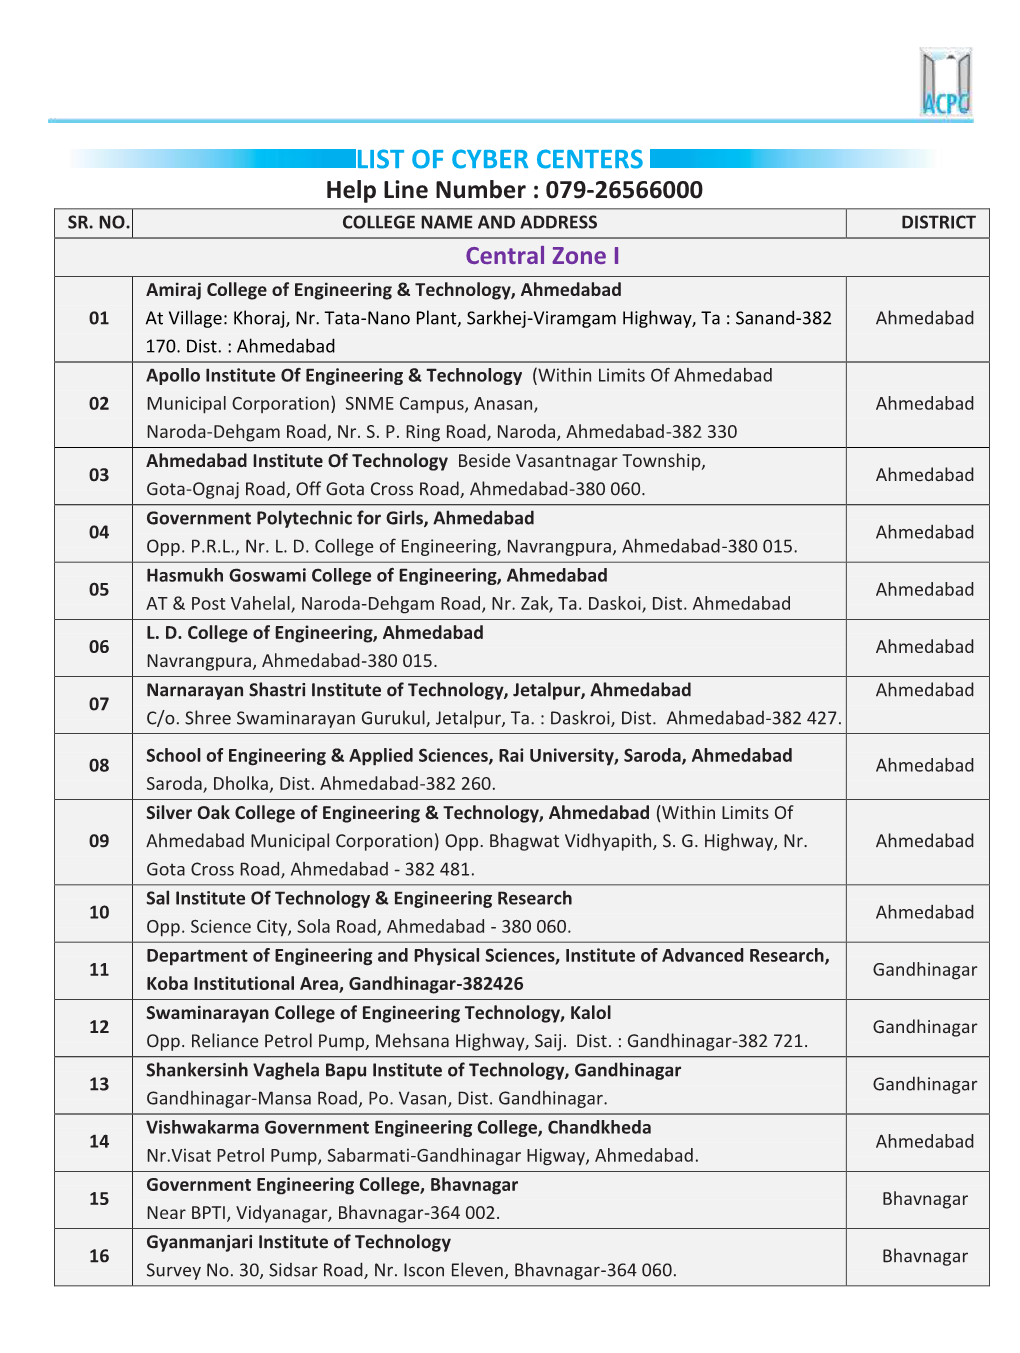 List of Cyber Centers for Degree Engineering